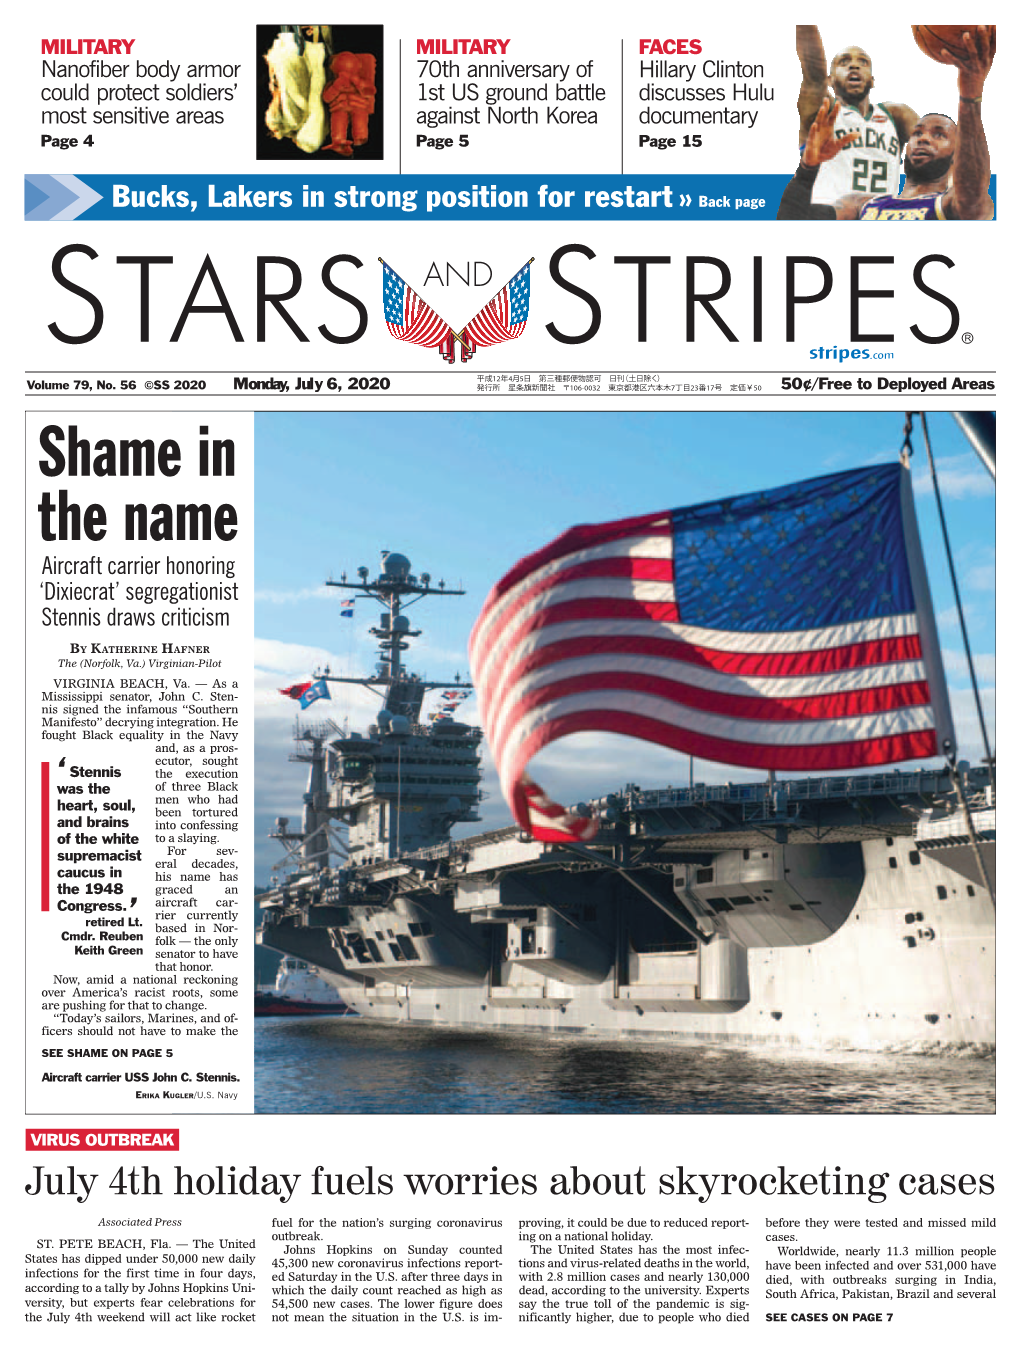 Shame in the Name Aircraft Carrier Honoring ‘Dixiecrat’ Segregationist Stennis Draws Criticism